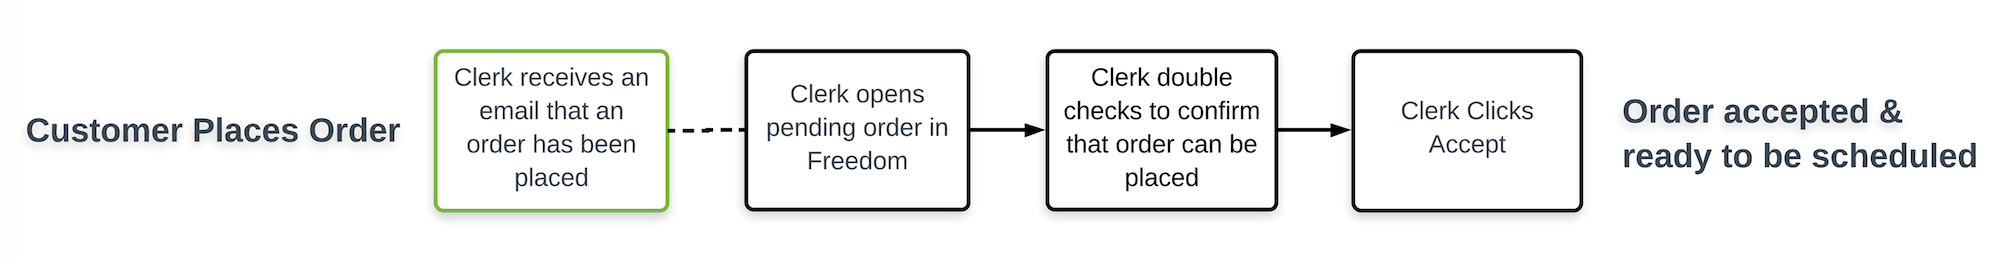 Diagram of the order entry process after the introduction of the web application